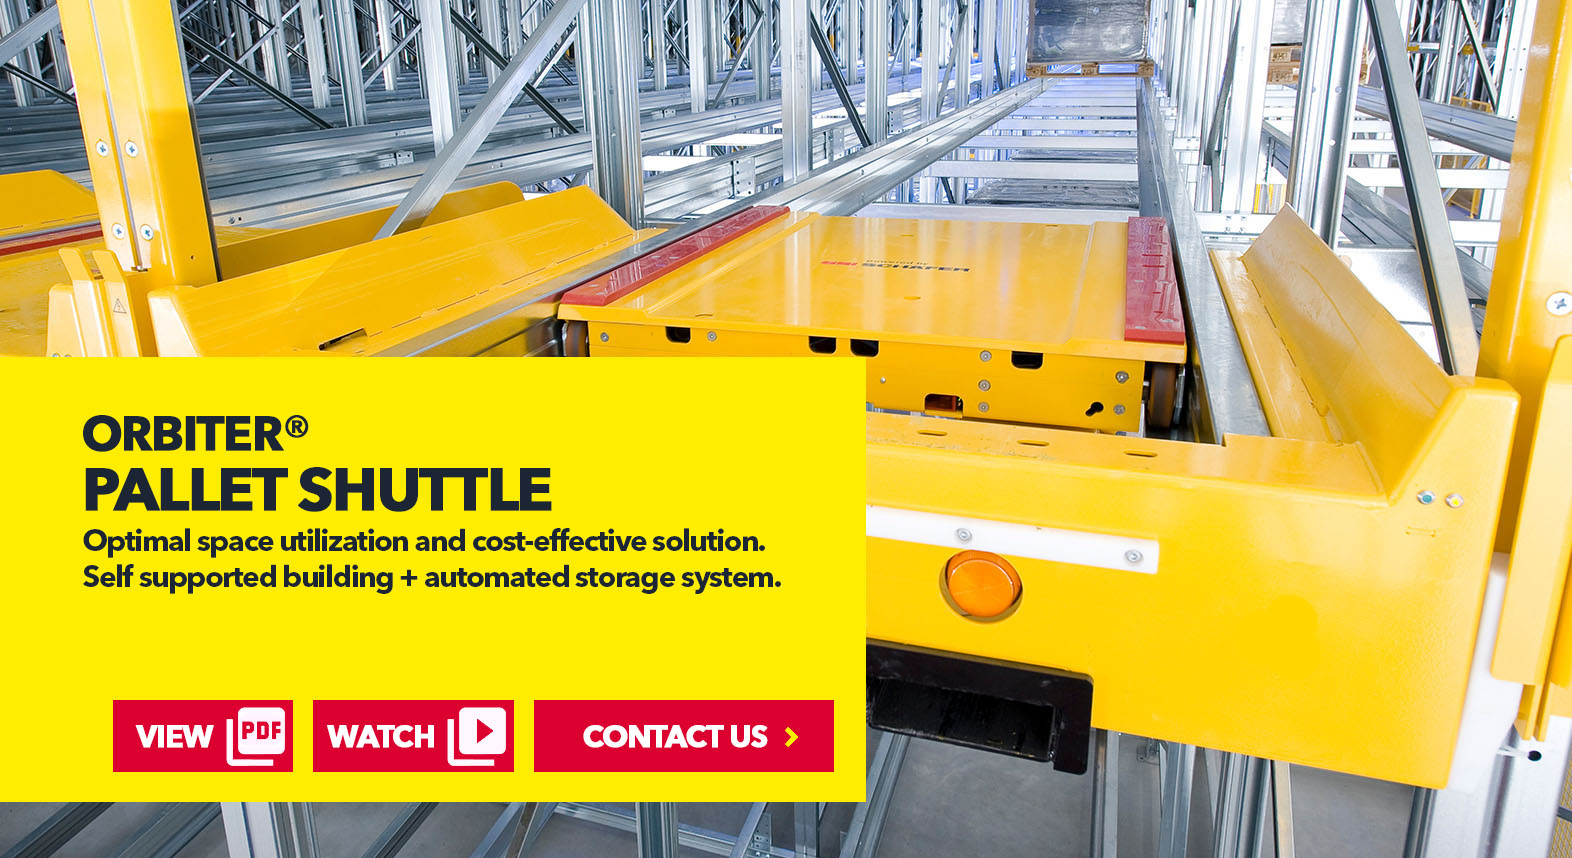 Orbiter Pallet Shuttle by SSI Schaefer USA Download Guide, Watch Video, Contact Us. www.chaefershelving.com